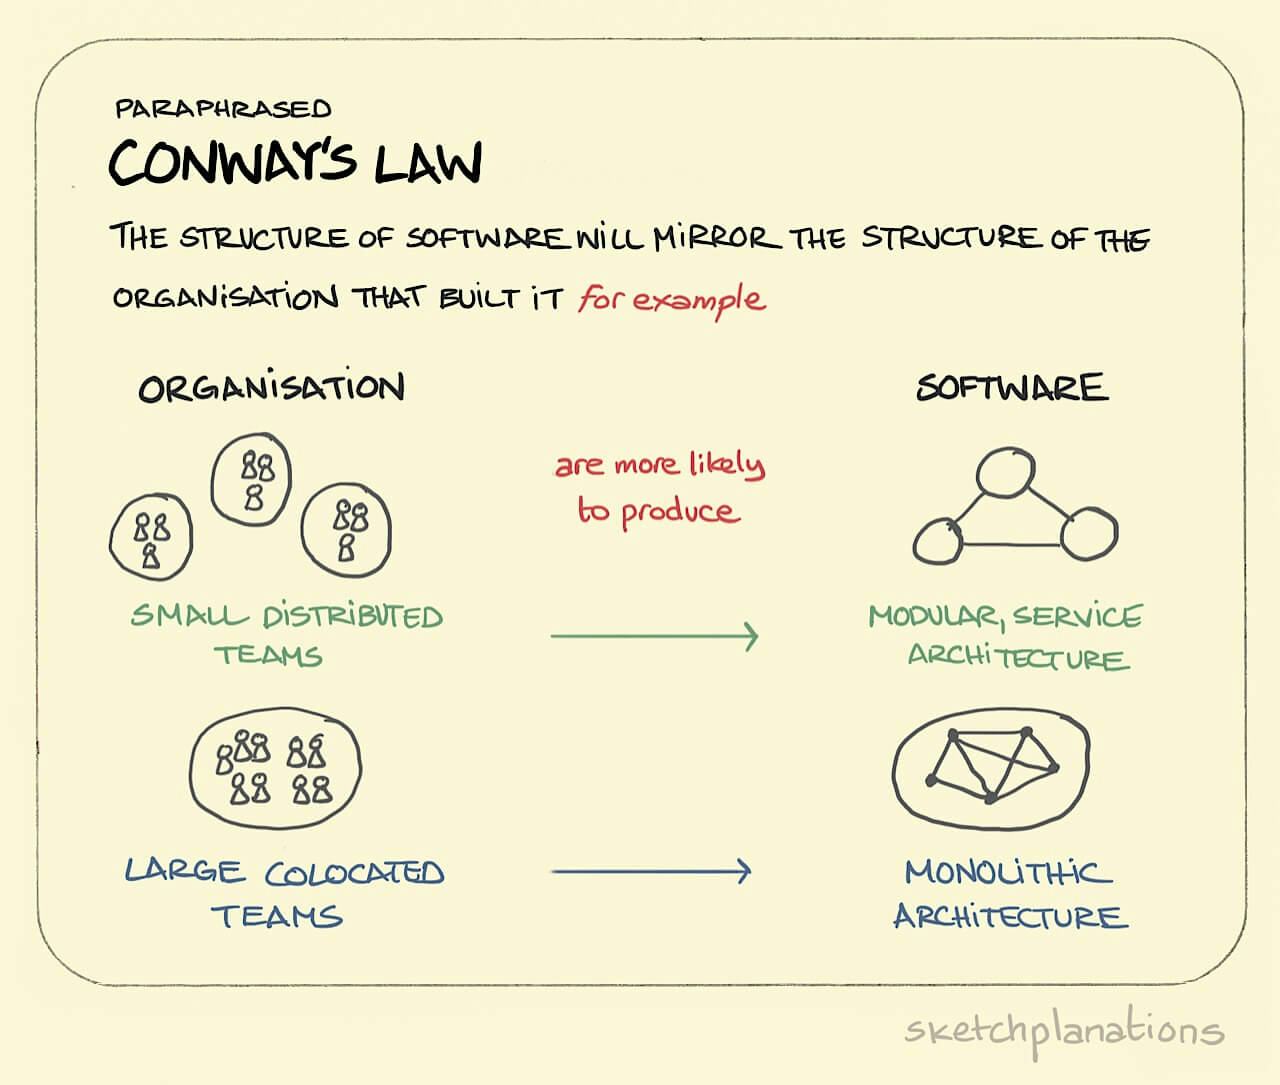 Conway's law showing how the organisation of a company, as small, distributed teams or large colocated teams can reflect the architecture of the software as modular or monolithic